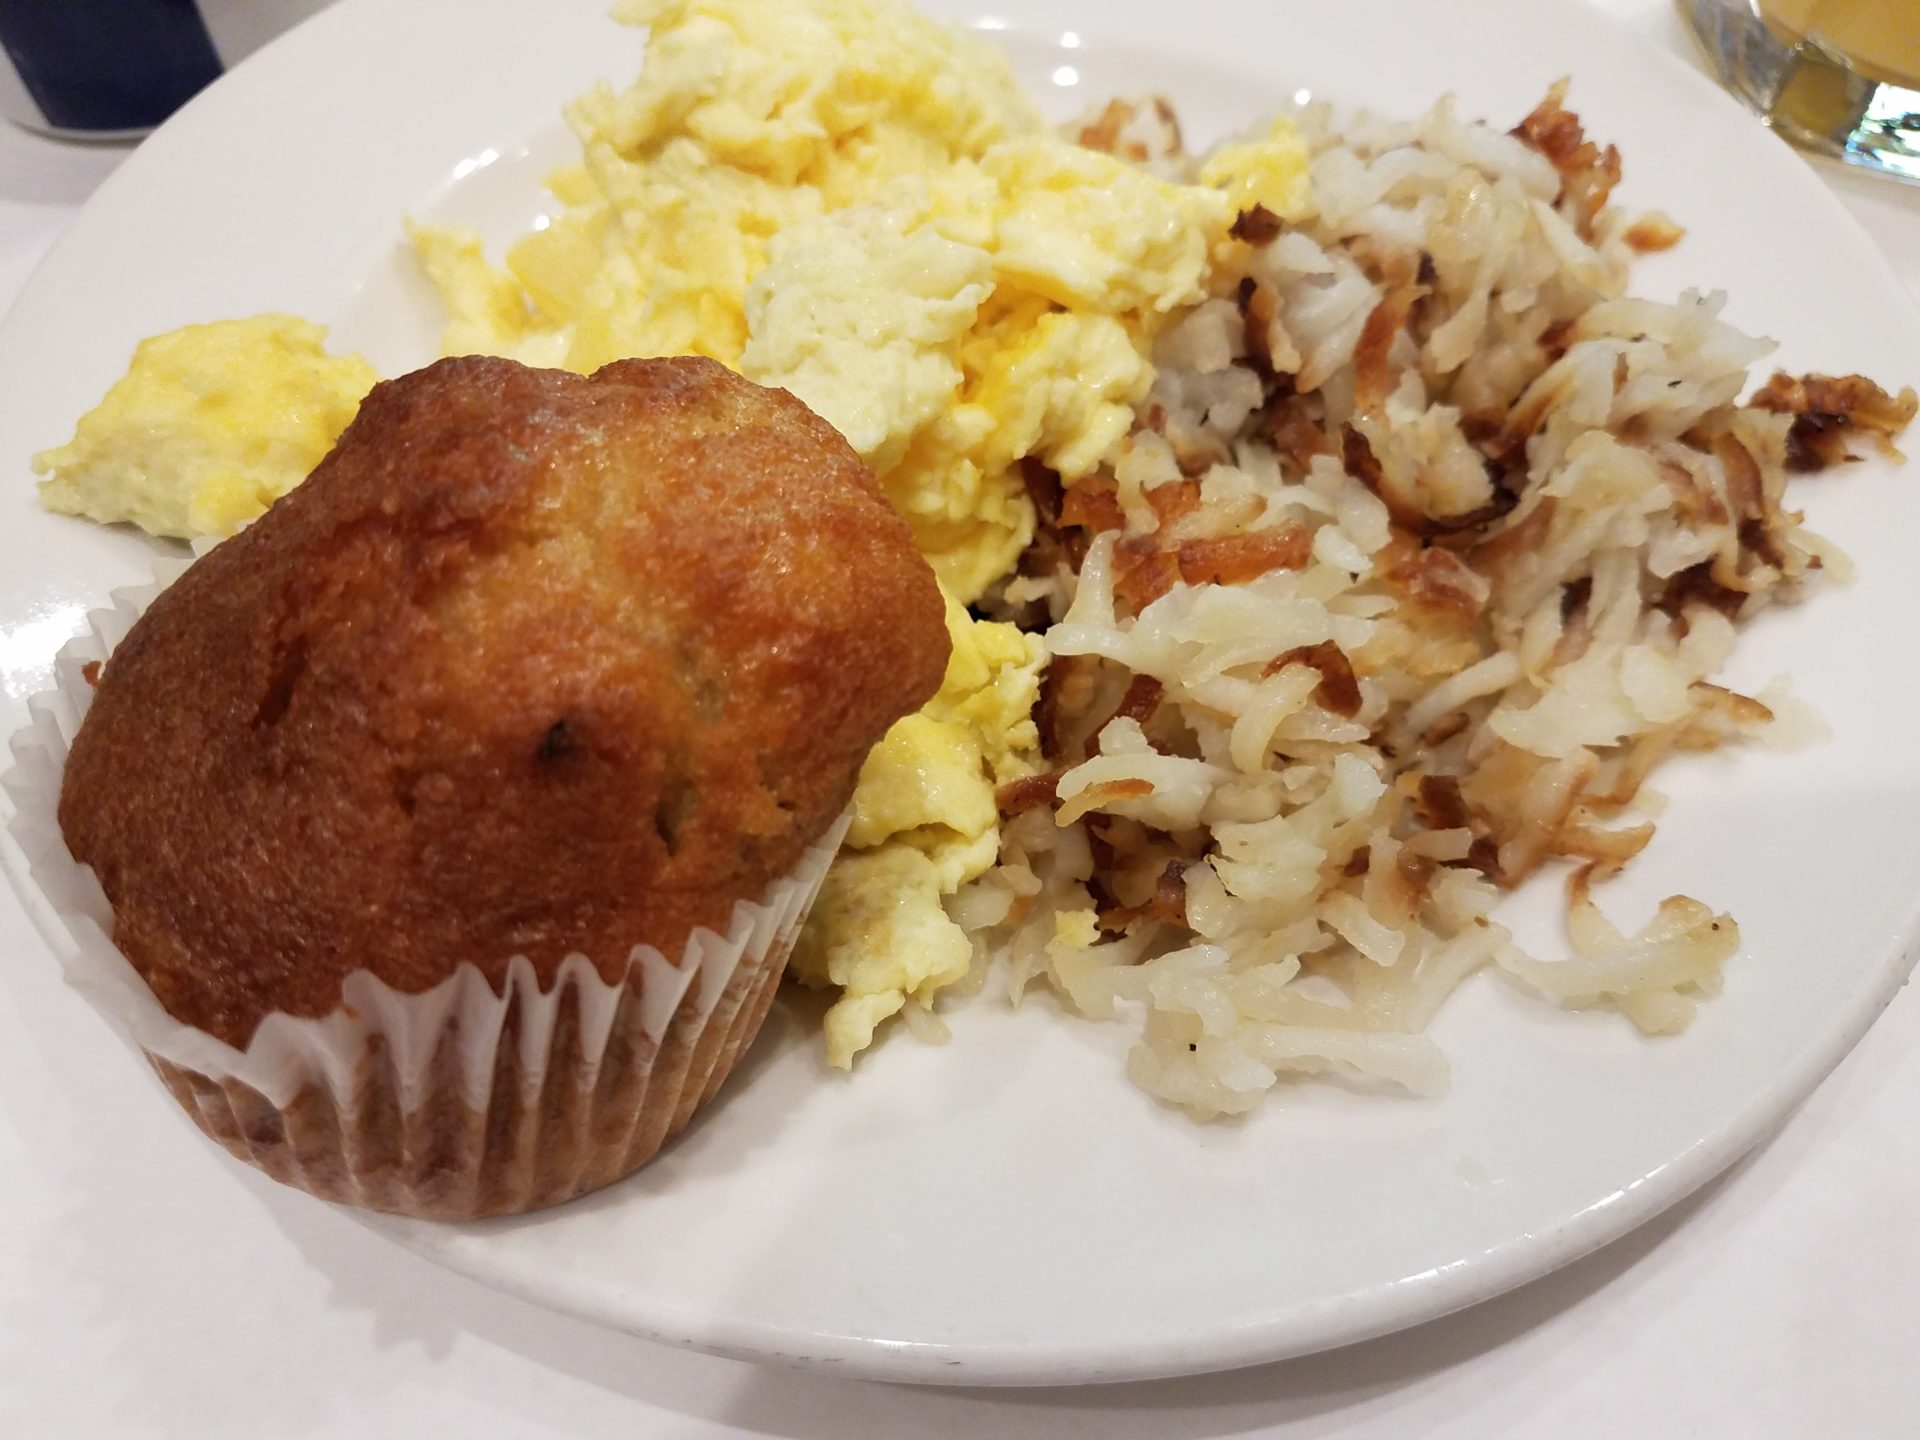 a muffin and eggs on a plate